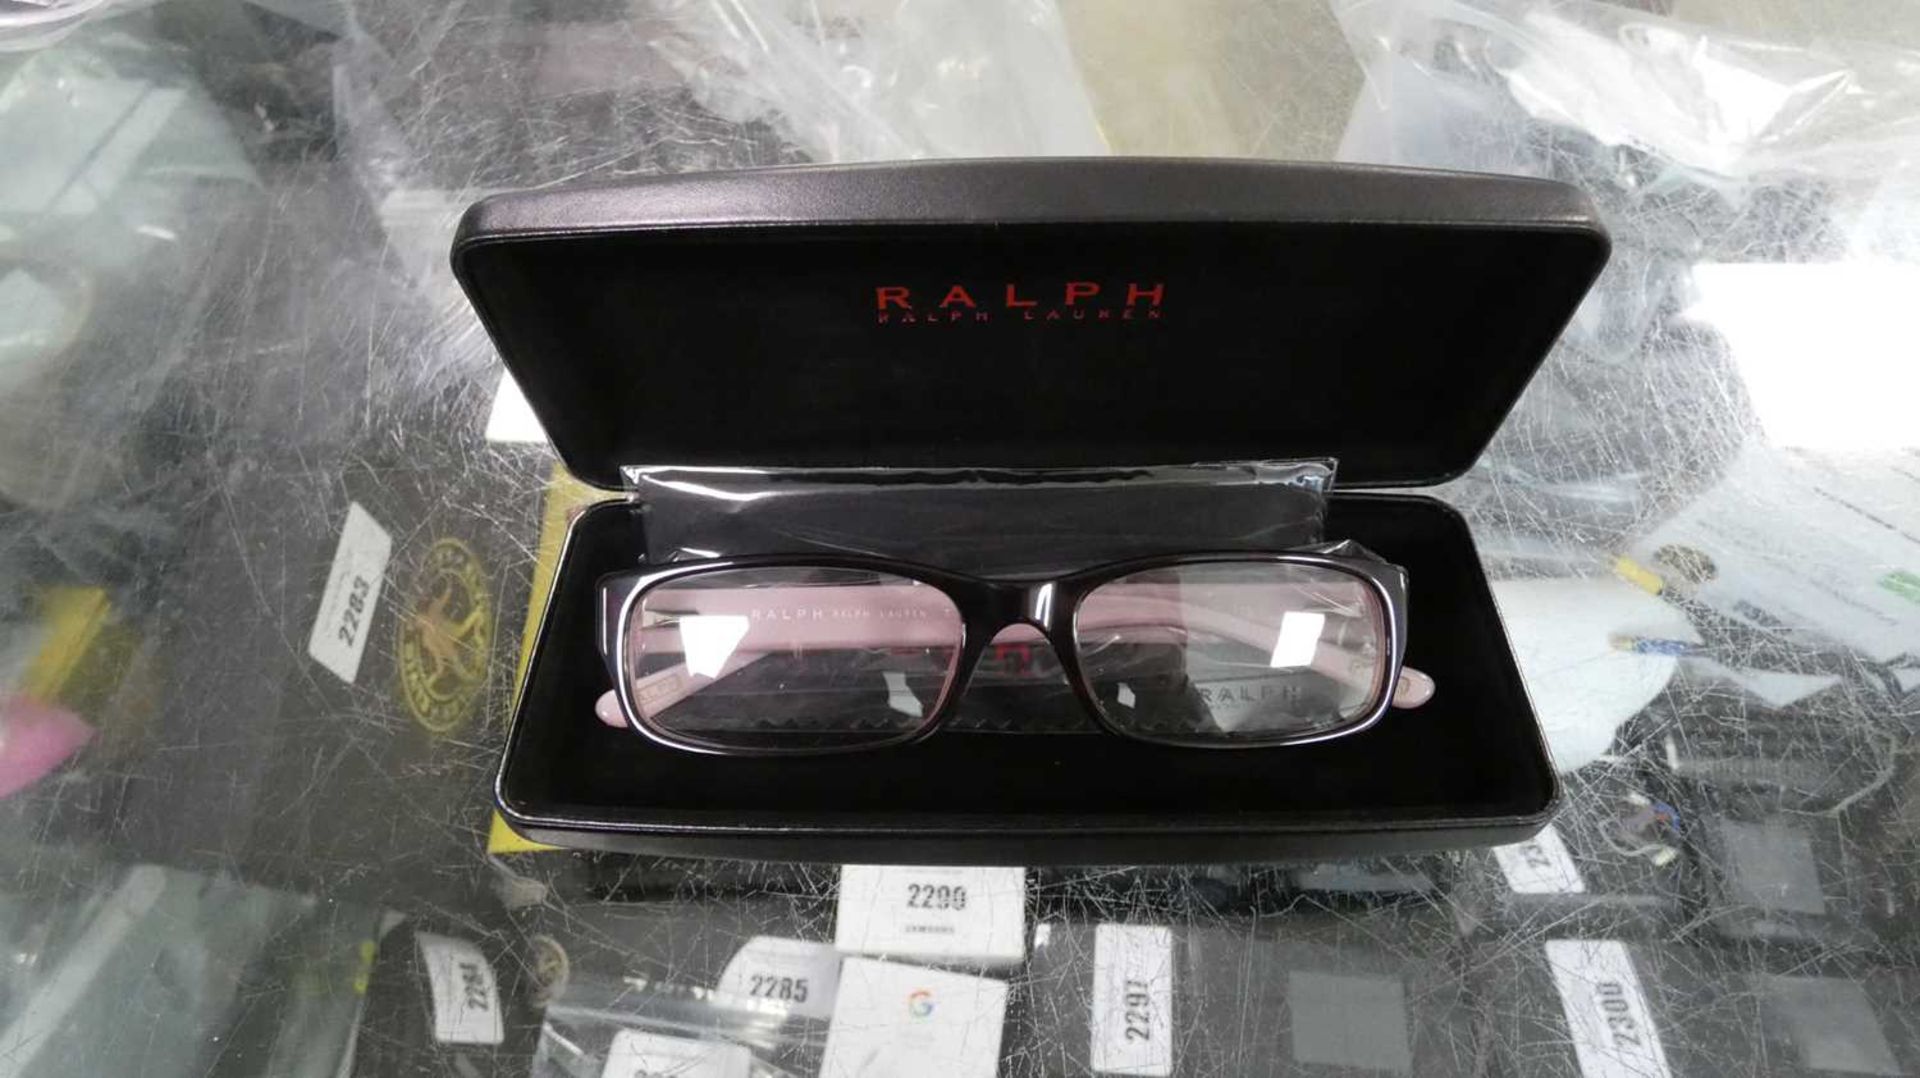 Pair of Ralph Lauren reading glasses in pink with box - Image 2 of 2